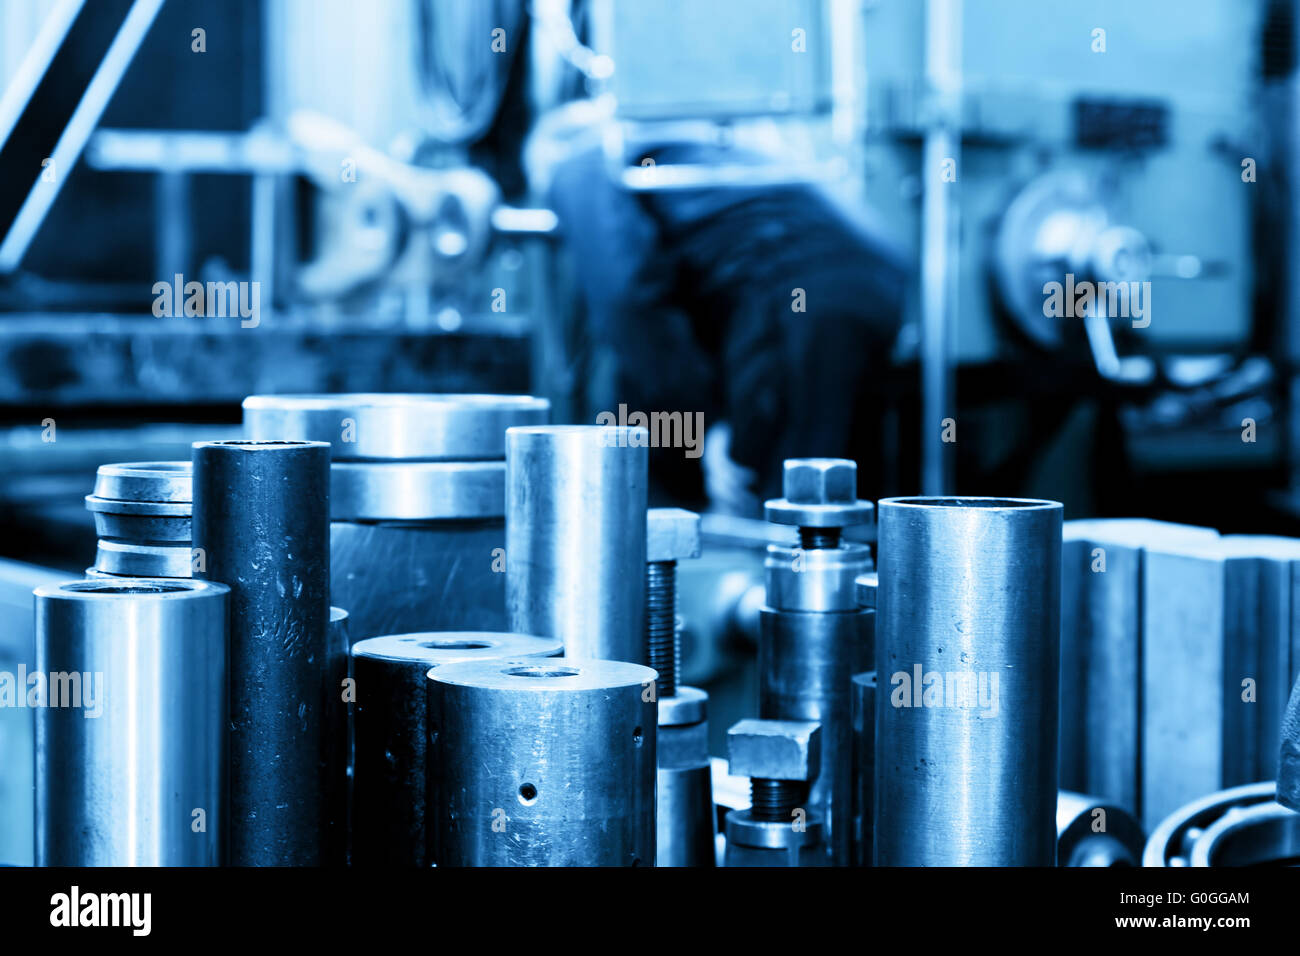 Industrial steel cylinders, pistons in workshop. Industry theme. Stock Photo